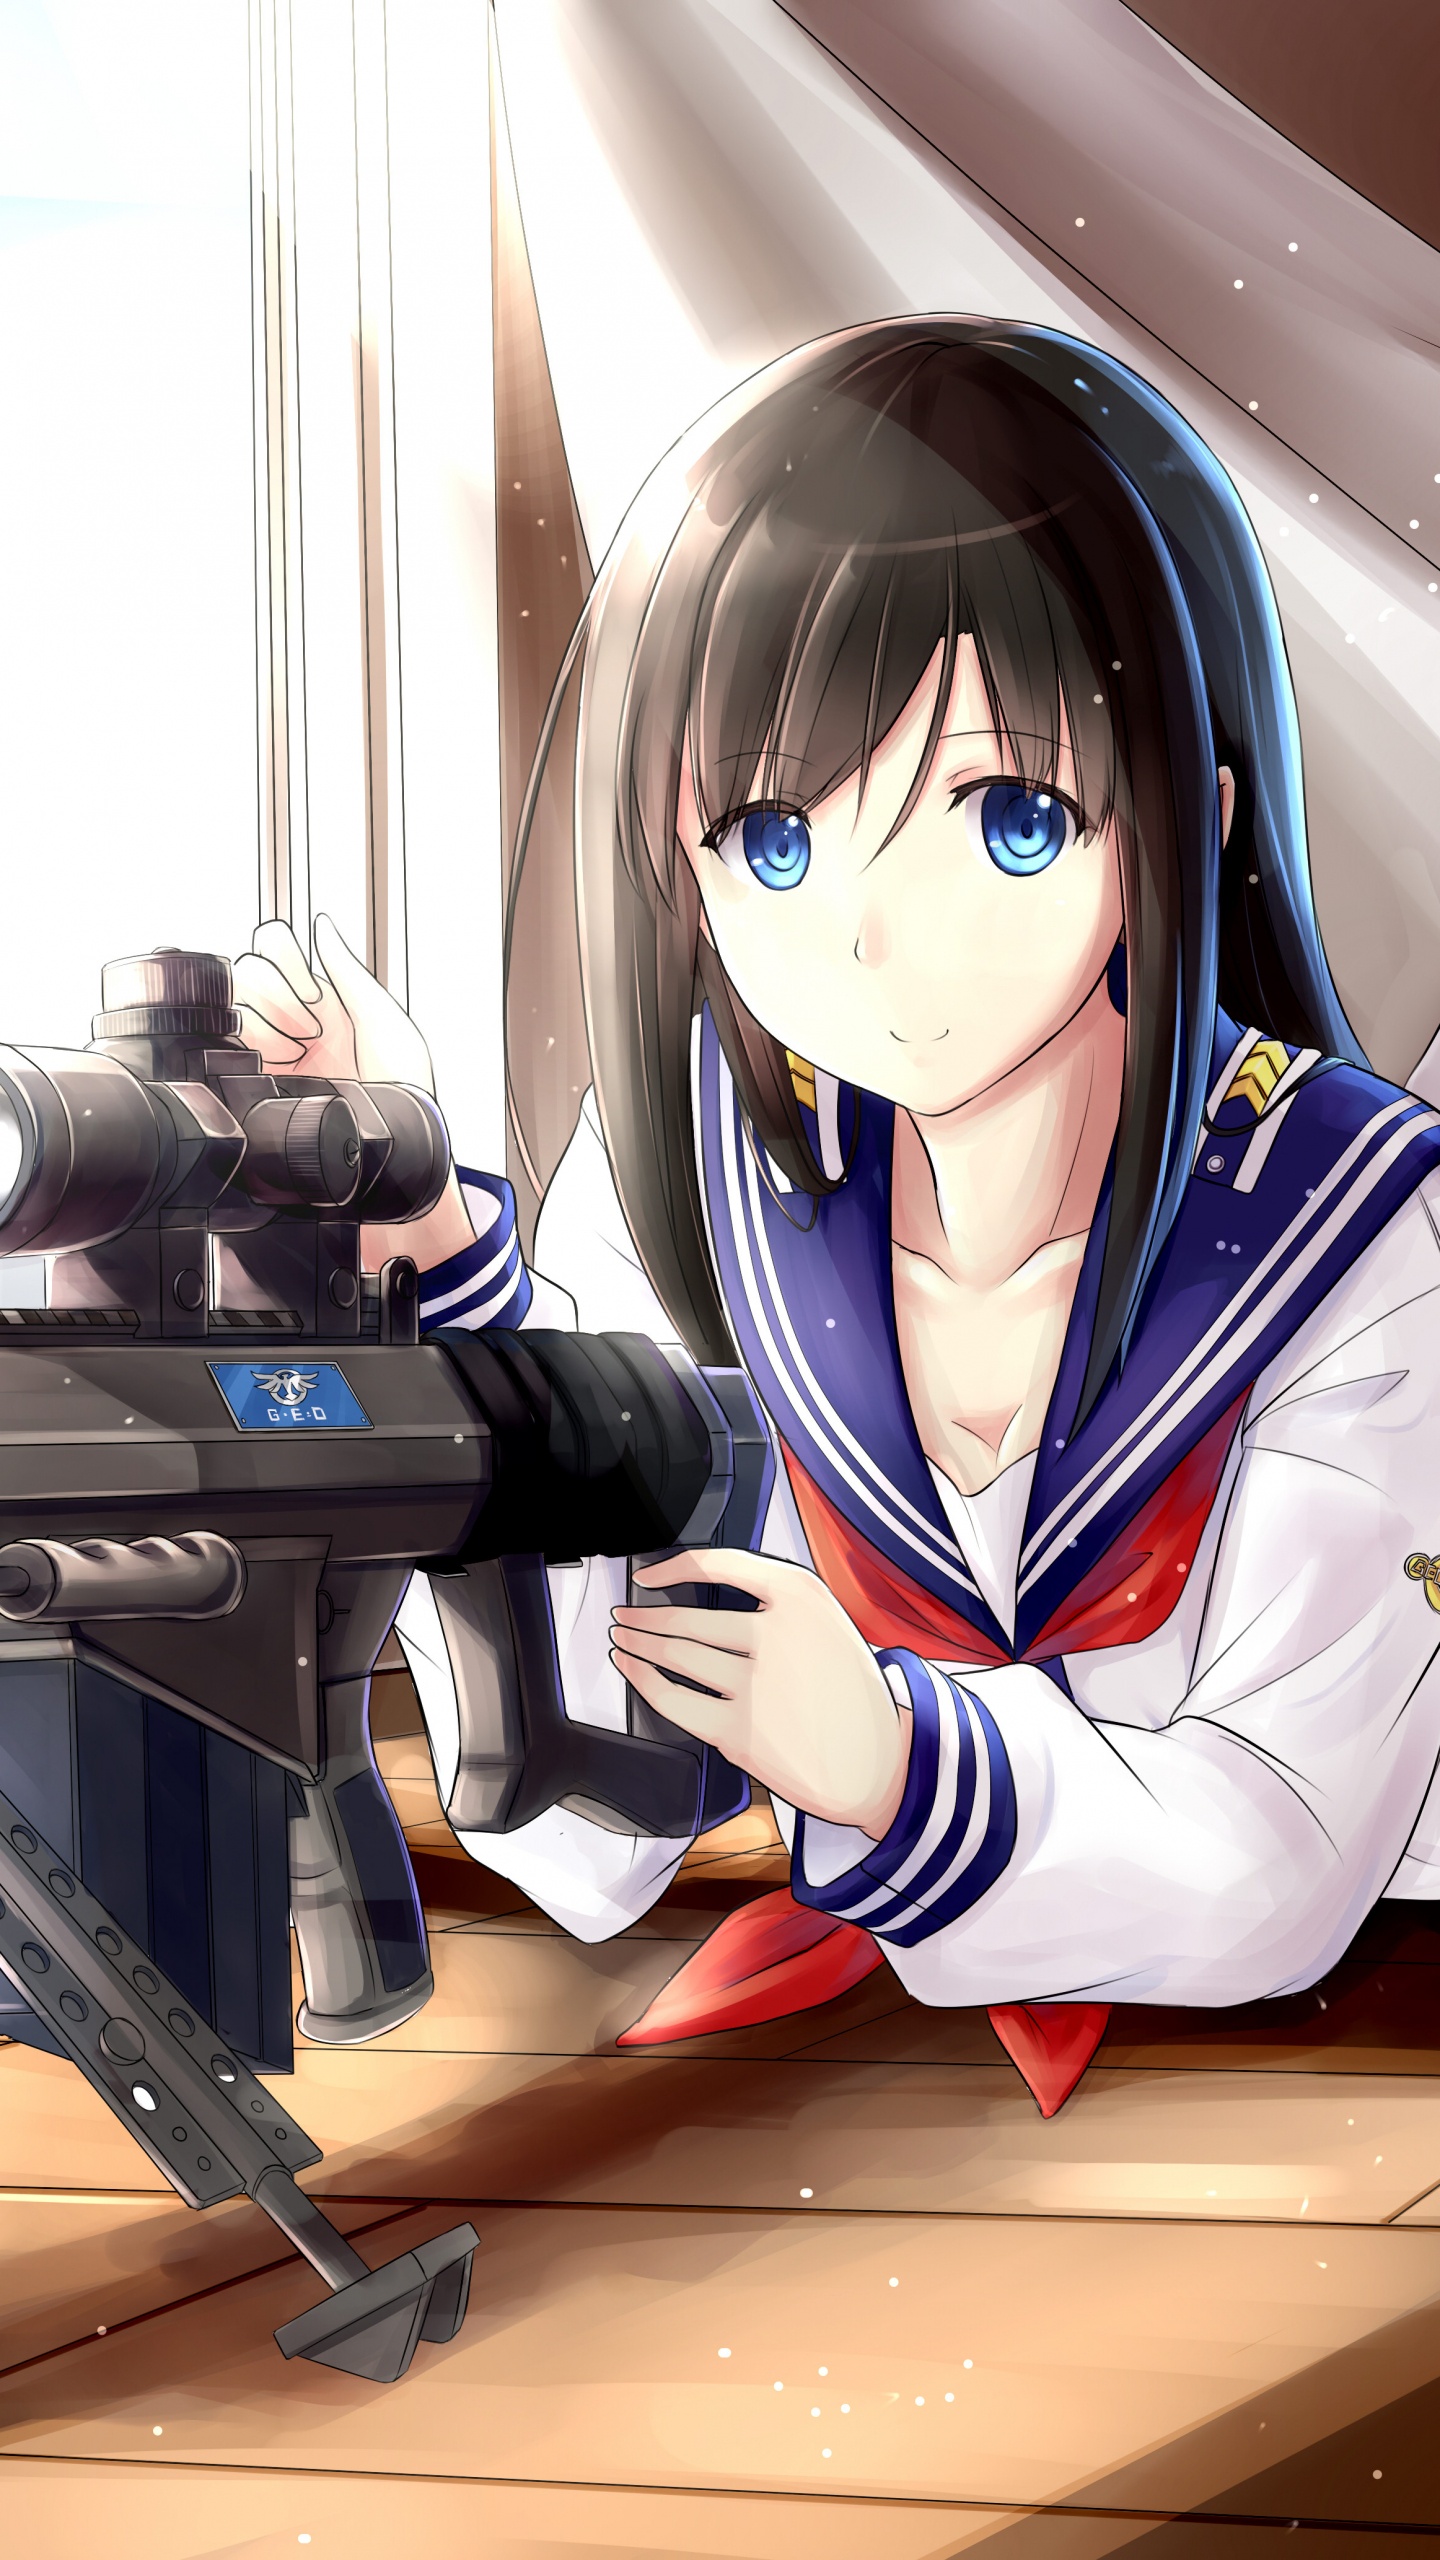 Woman in White and Blue Jacket Holding Black Rifle. Wallpaper in 1440x2560 Resolution